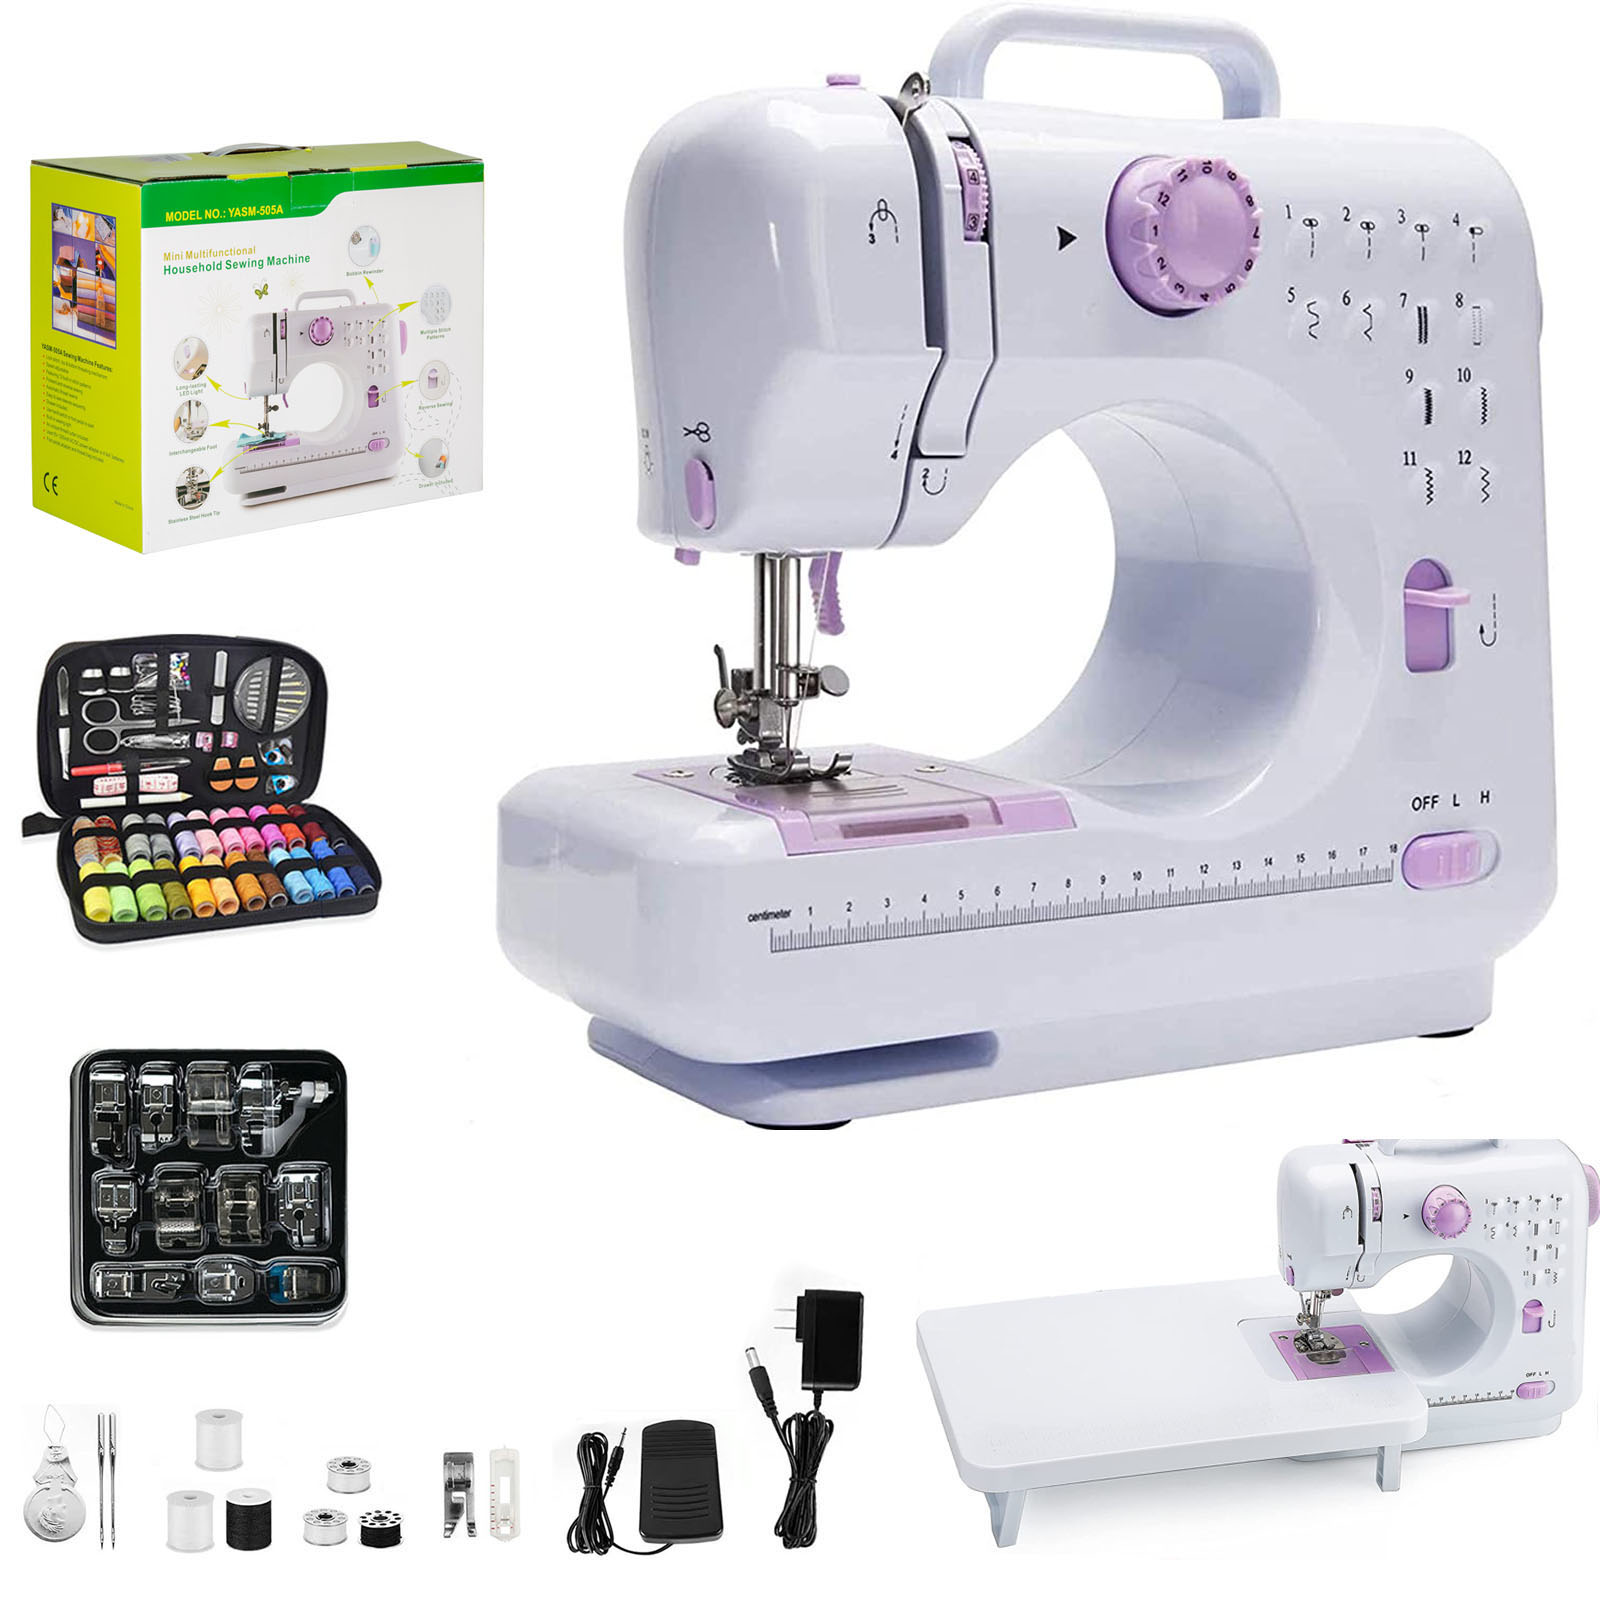 VIFERR Portable Sewing Machine, Mini Household Sewing Machine for Beginners  Multifunctional Electric Crafting Machine 12 Built-in Stitches with 97PCS